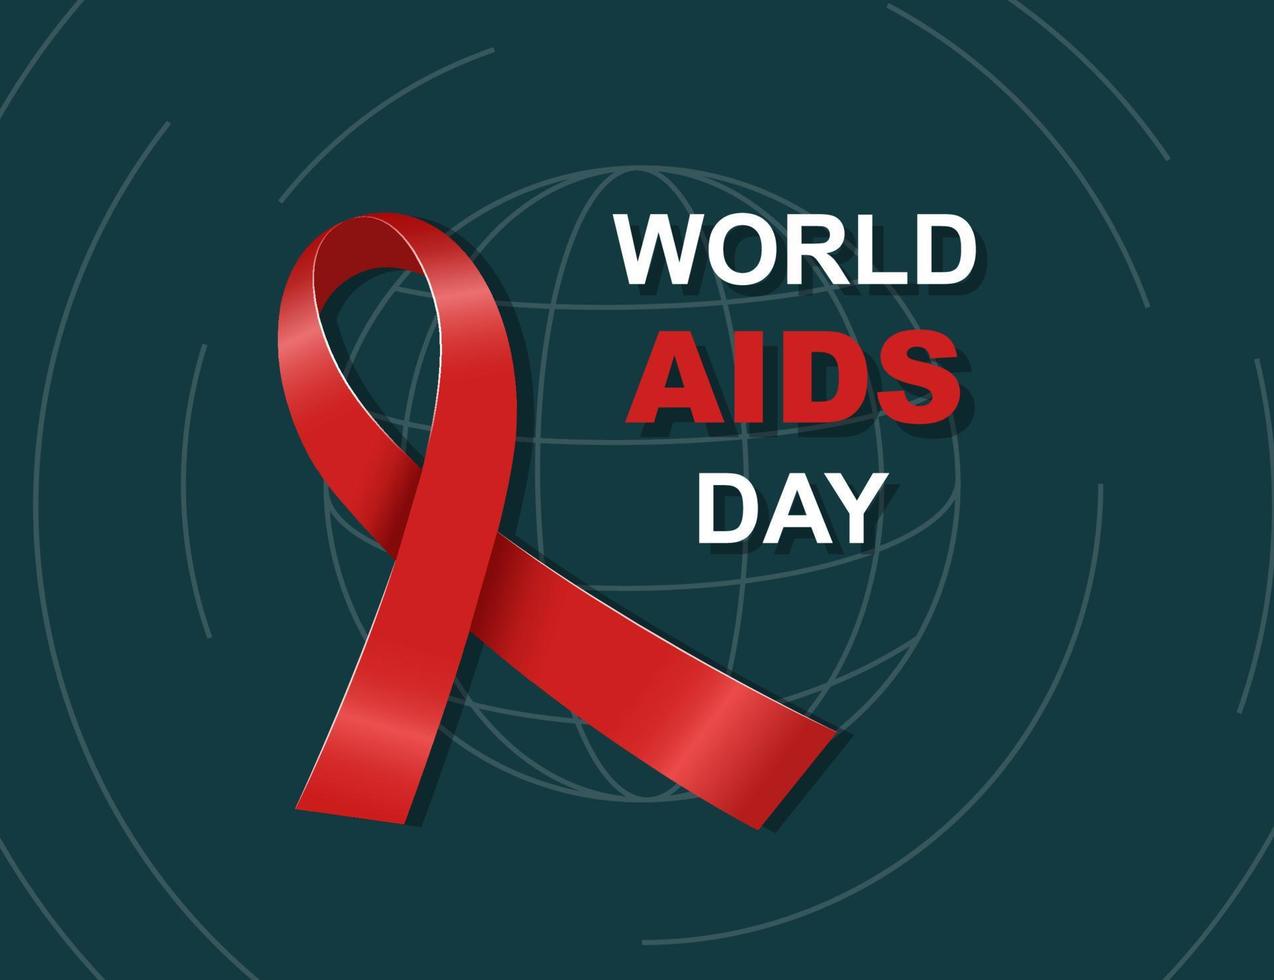 Vector aids red ribbon on the dark background. World AID's day banner with text. Red crossed ribbon in realistic style. 1 december. Stop aids.